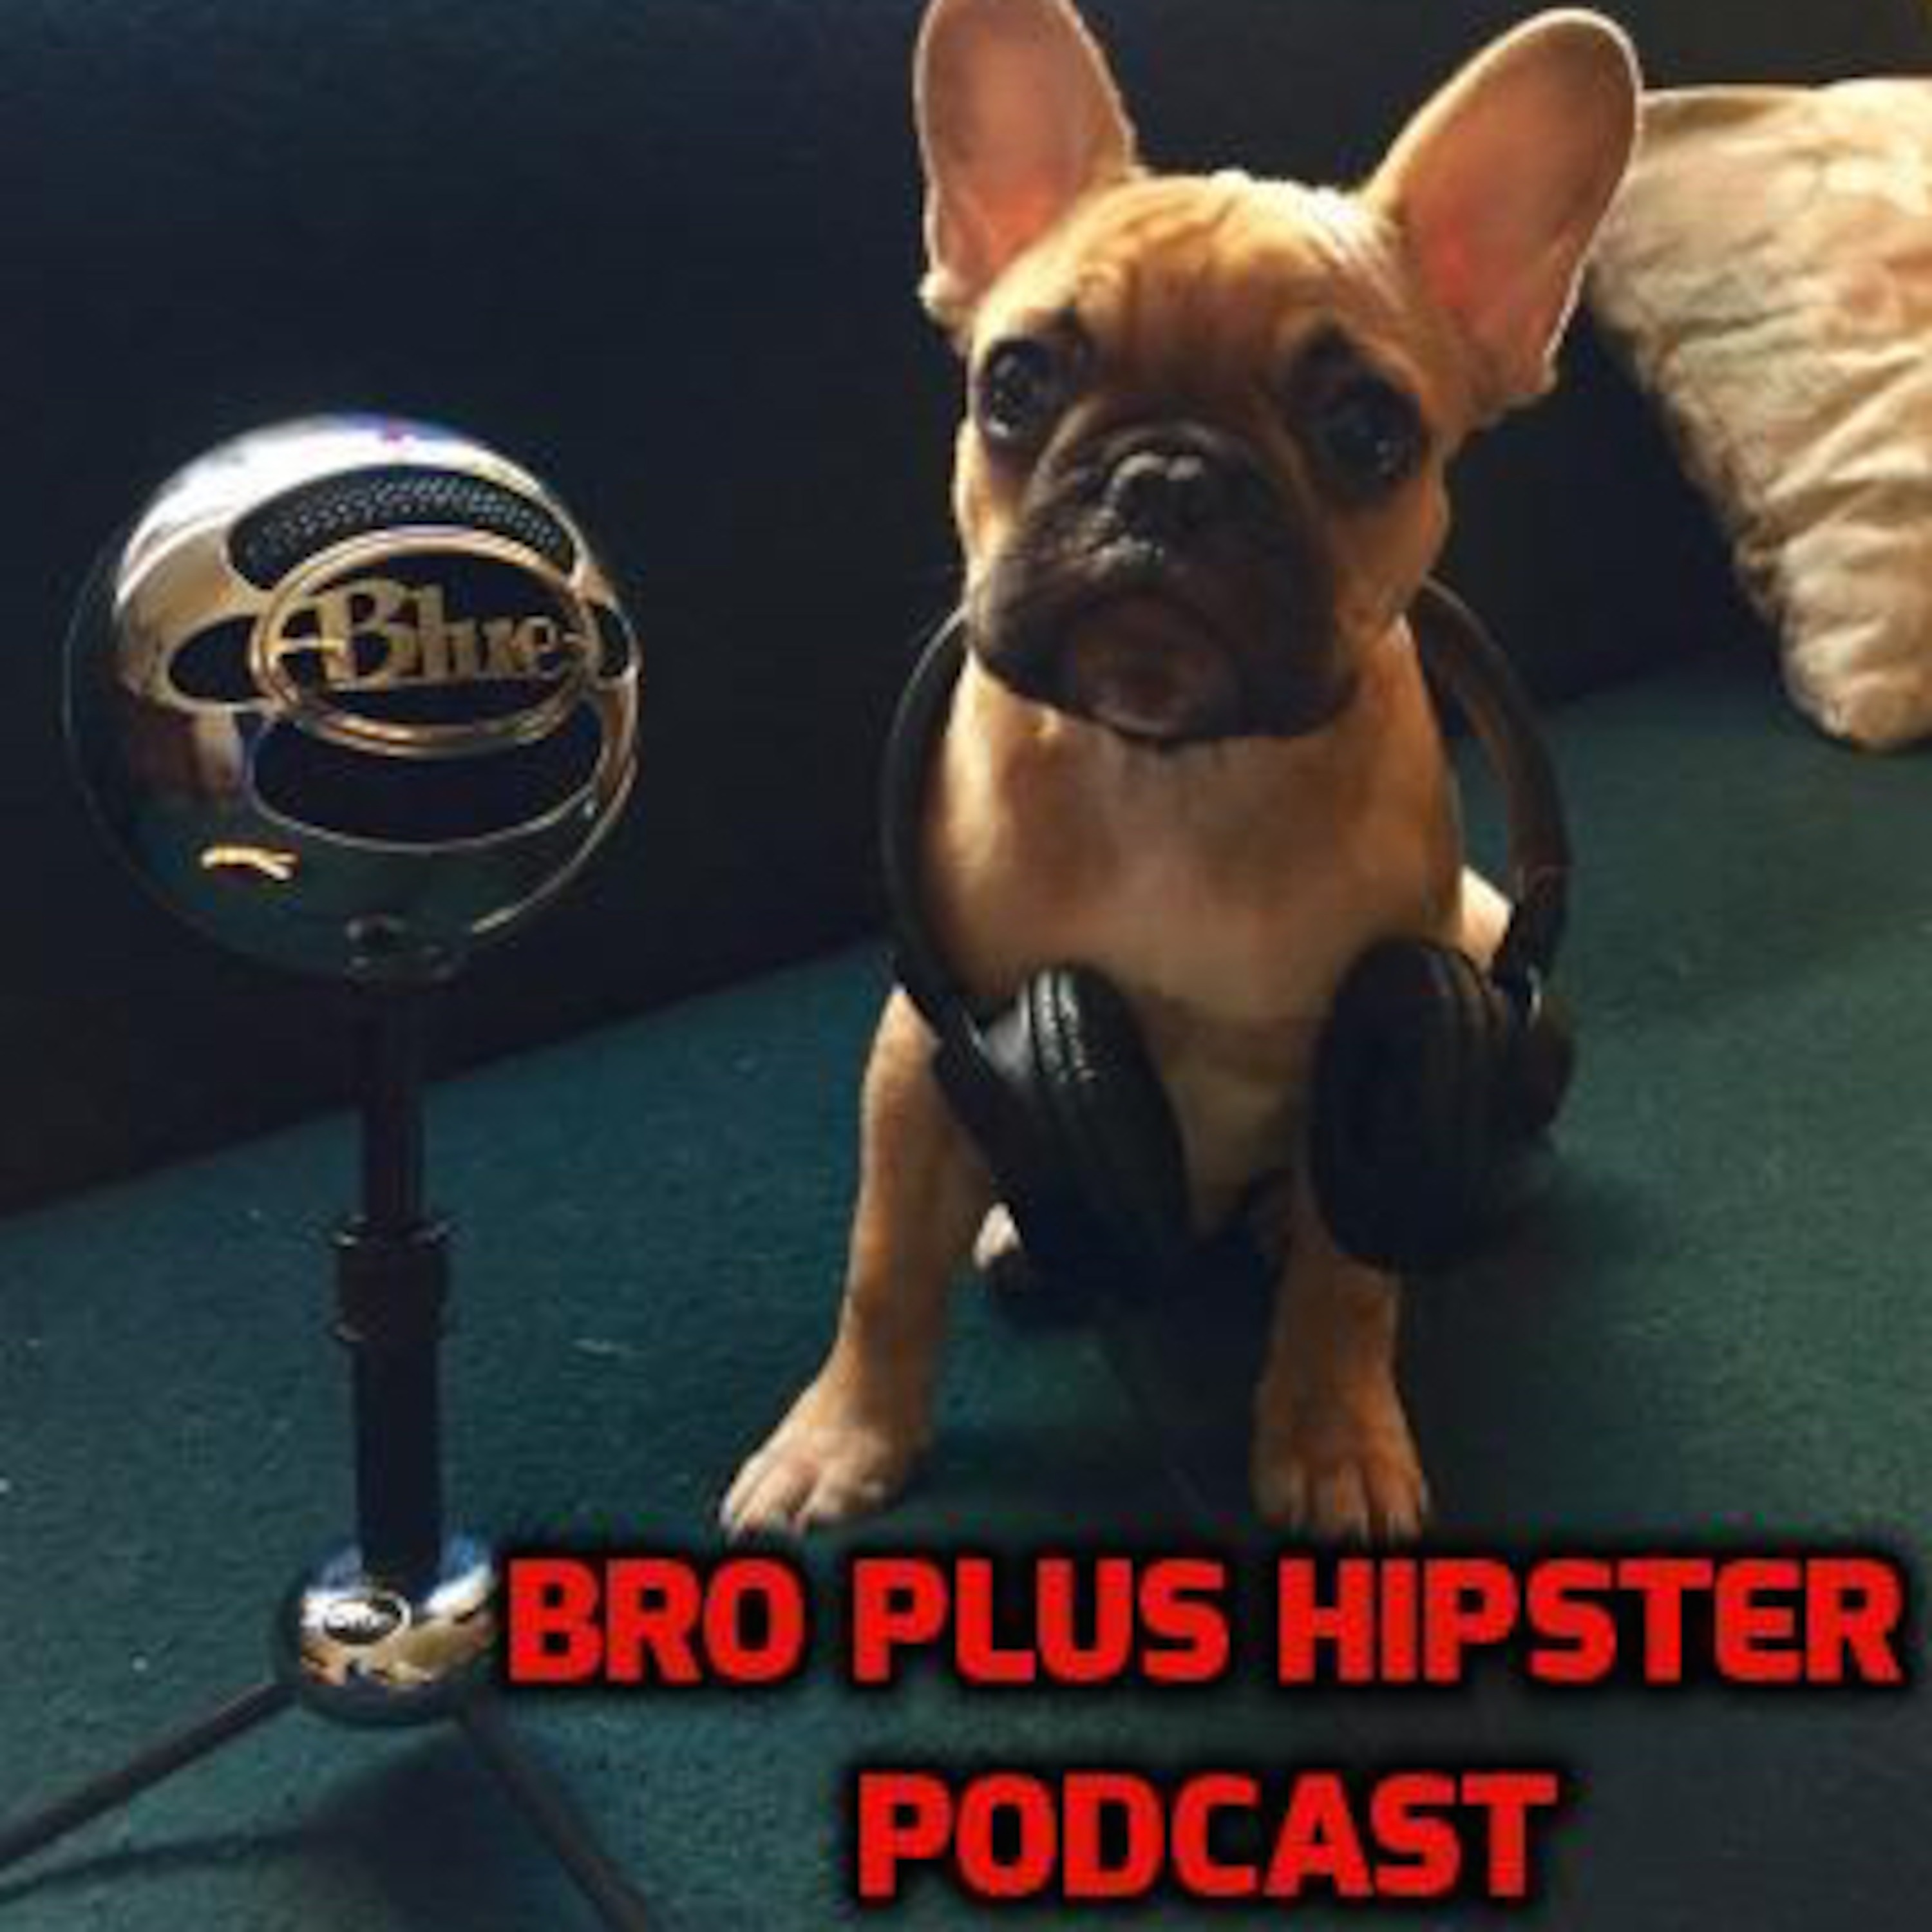 Bro Plus Hipster Podcast